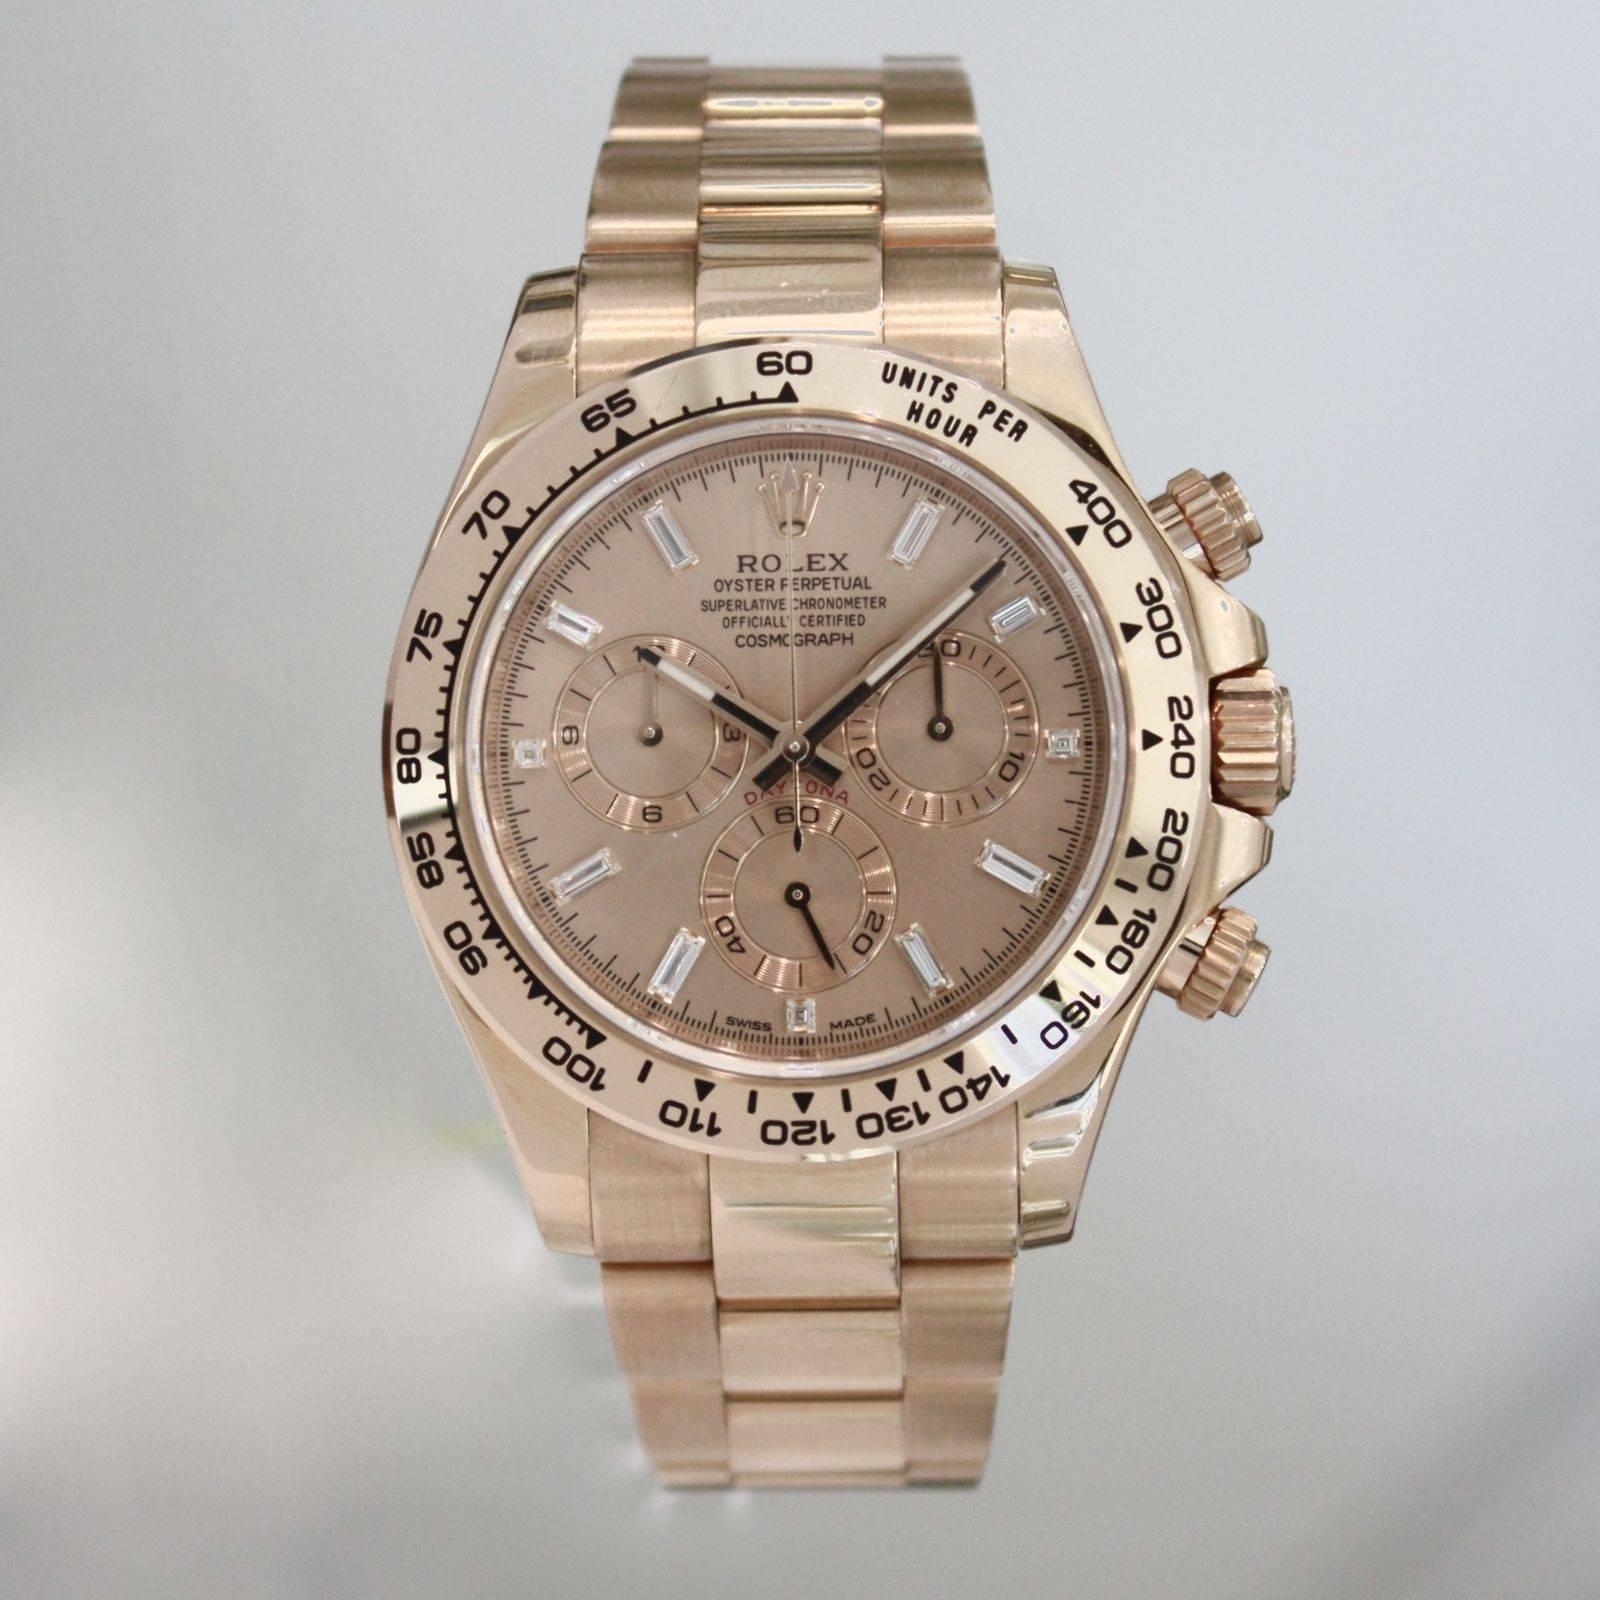 Brand Name: Rolex
Style Number: Daytona Cosmograph
Series: 116505
Gender: Unisex
Case Material: 18kt Everose Gold
Dial Color	: Pink Gold
Movement: Automatic
Engine: Rolex Calibre 4130
Functions: Chronograph, Tachymeter, Date, Hour, Minute,